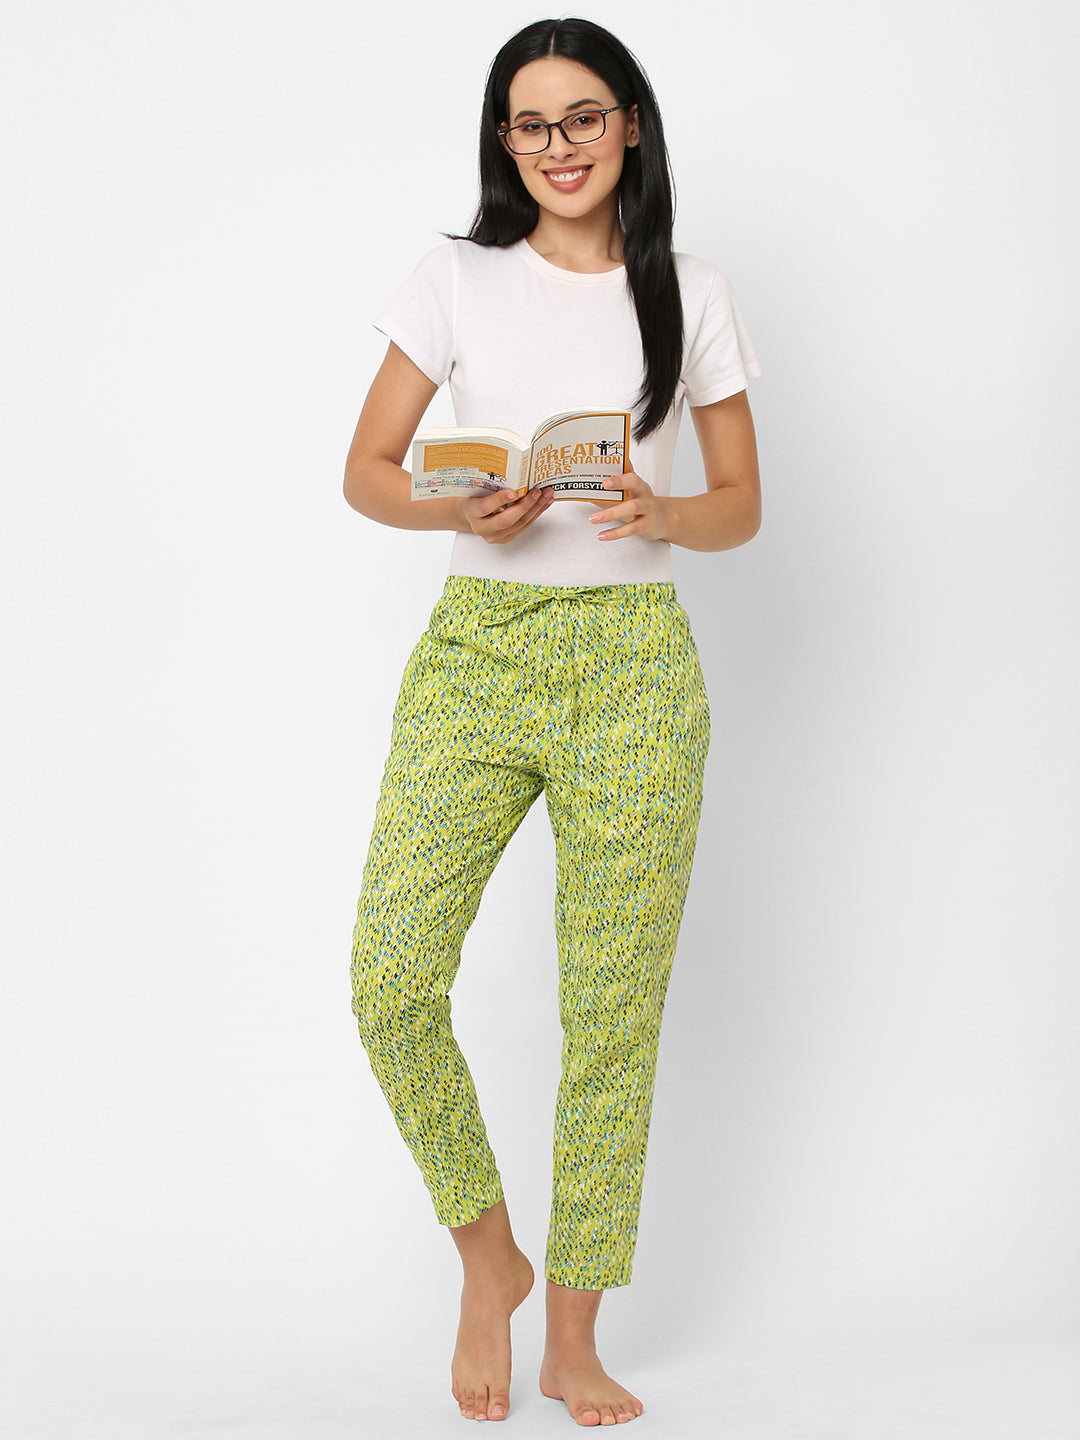 Women's Printed, Green, Cotton, Regular Fit, Elasticated, Waistband, Pyjama  With Side Pockets